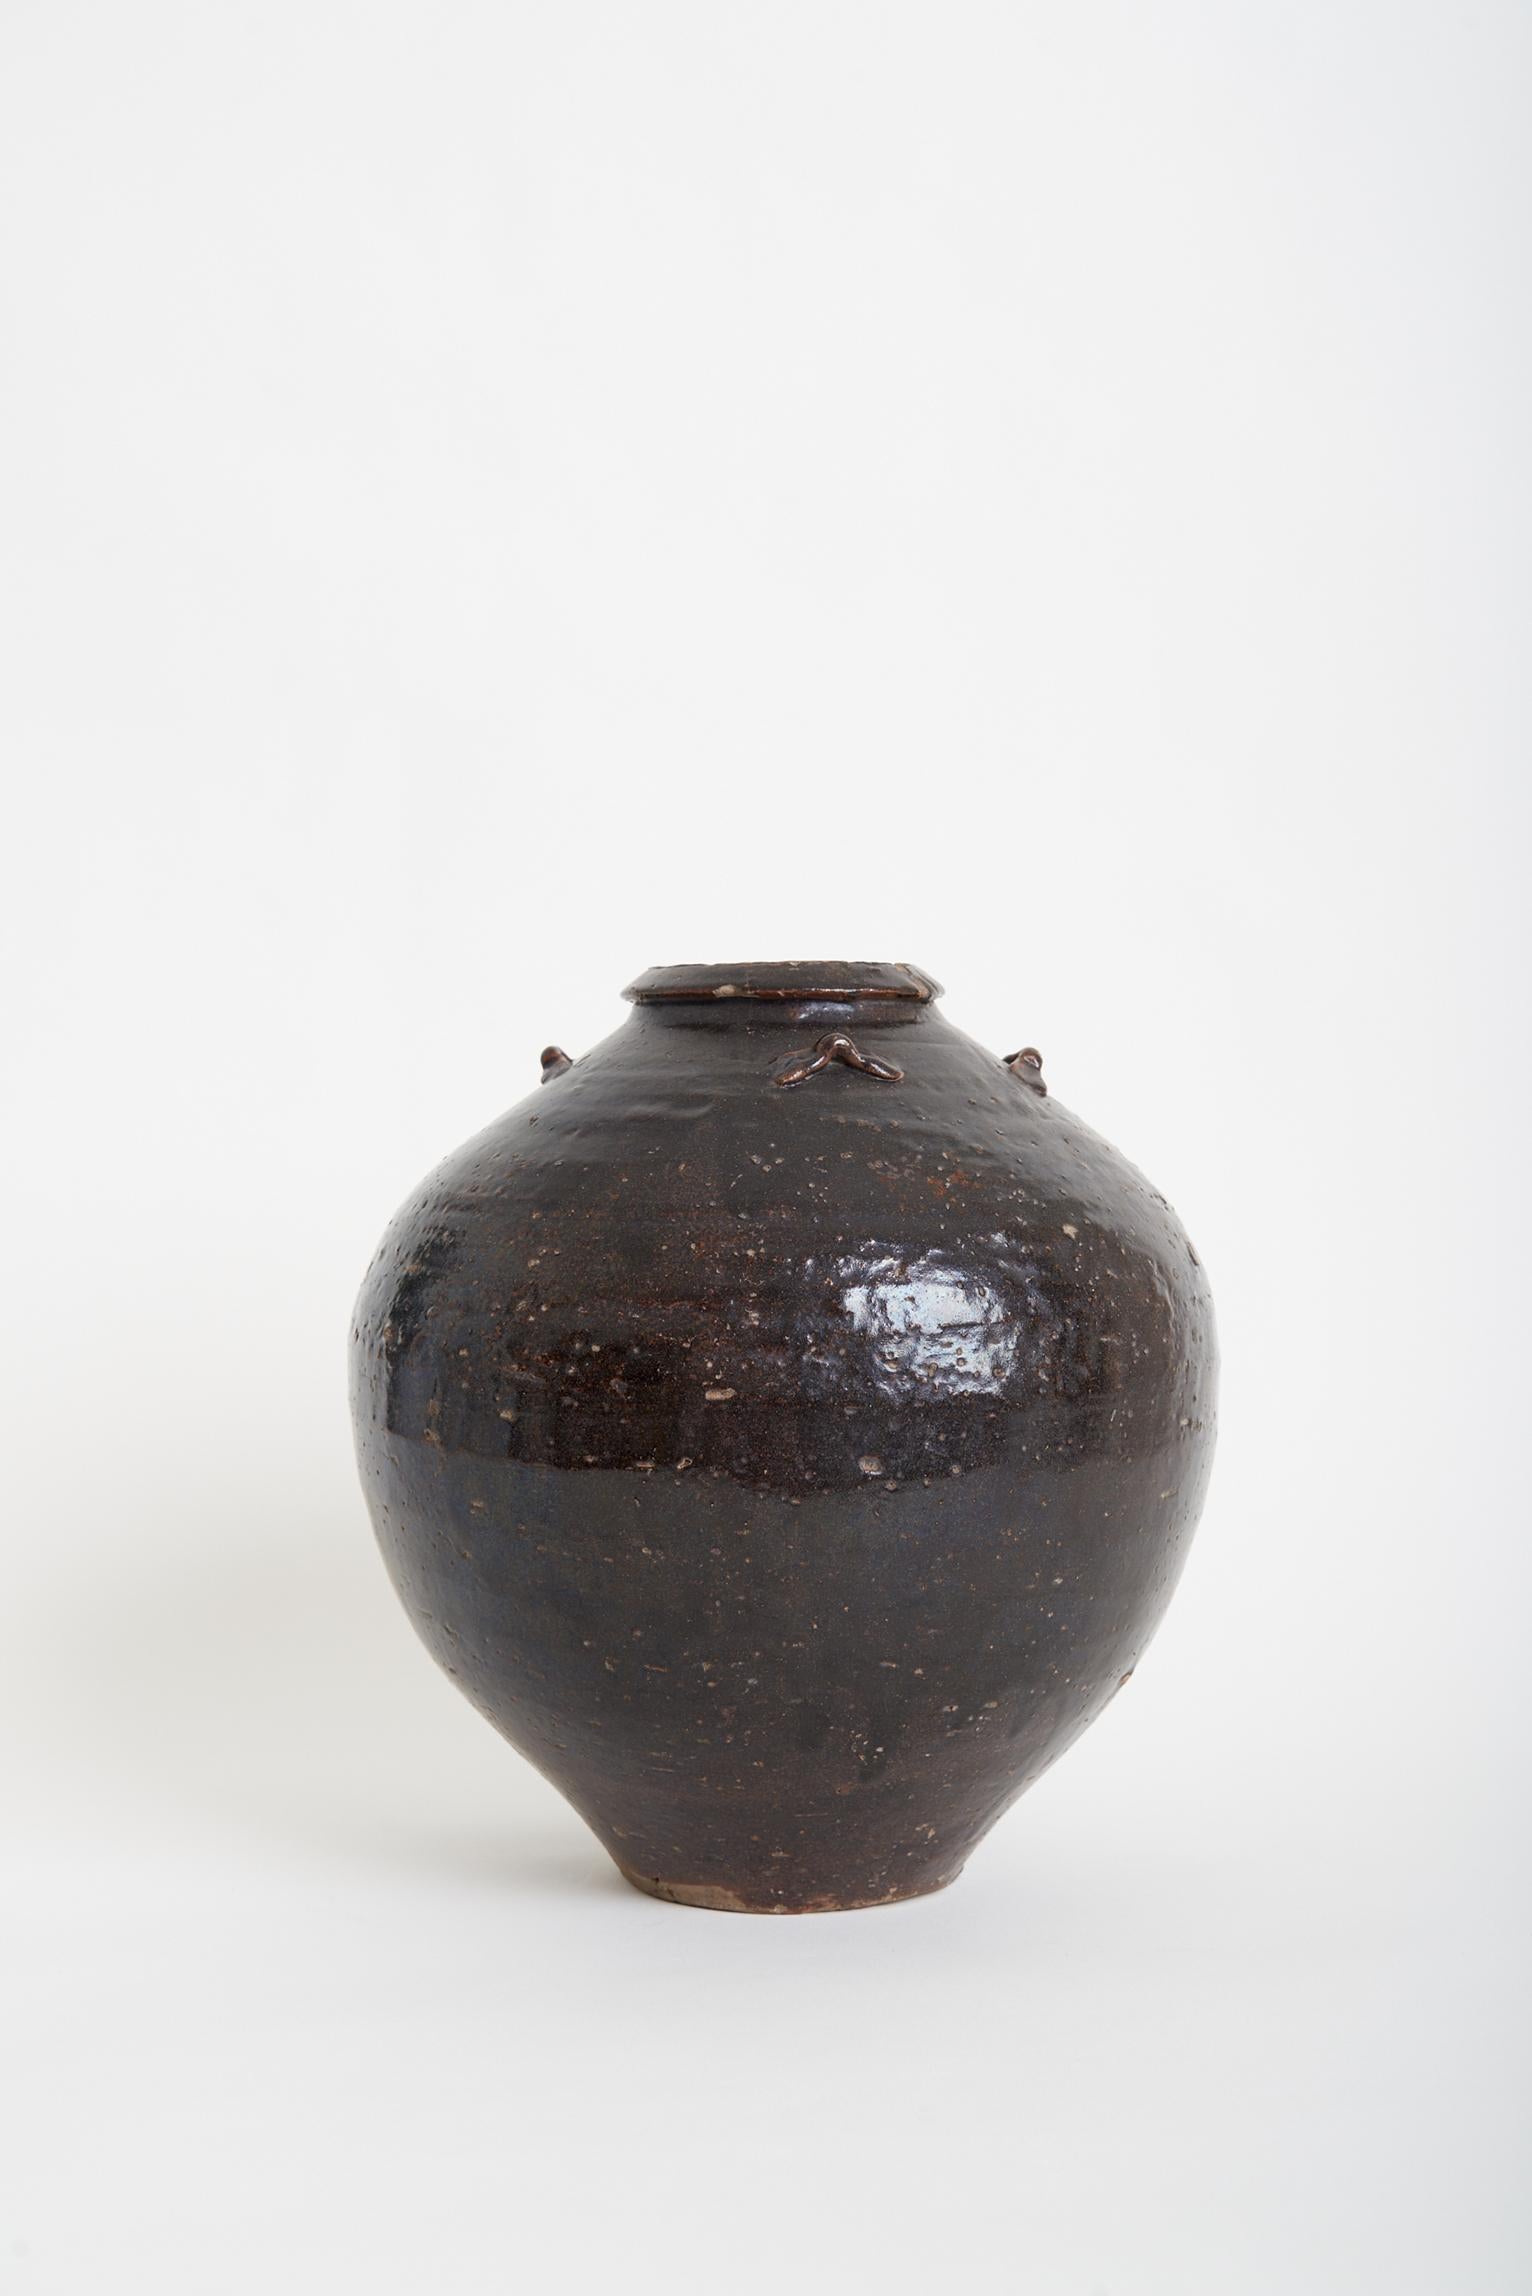 A large brown glazed ceramic vase.
South of France, early 20th century.